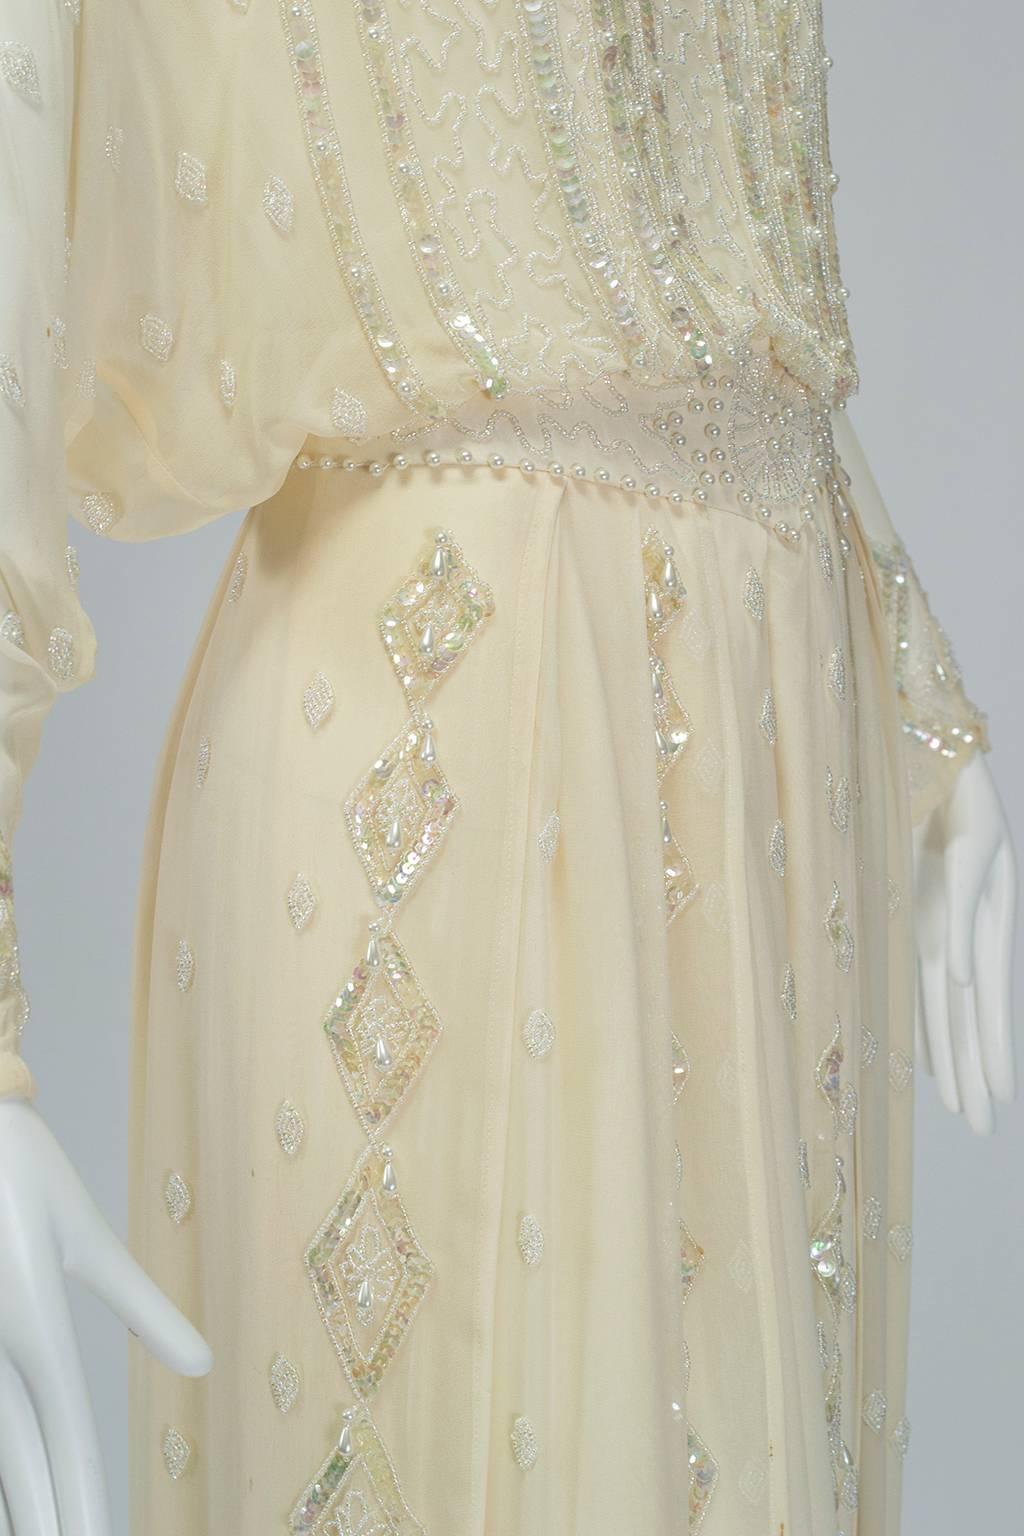 Women's Ivory Edwardian Reproduction Ornamented Silk Tea or Bridal Gown - Small, 1980s